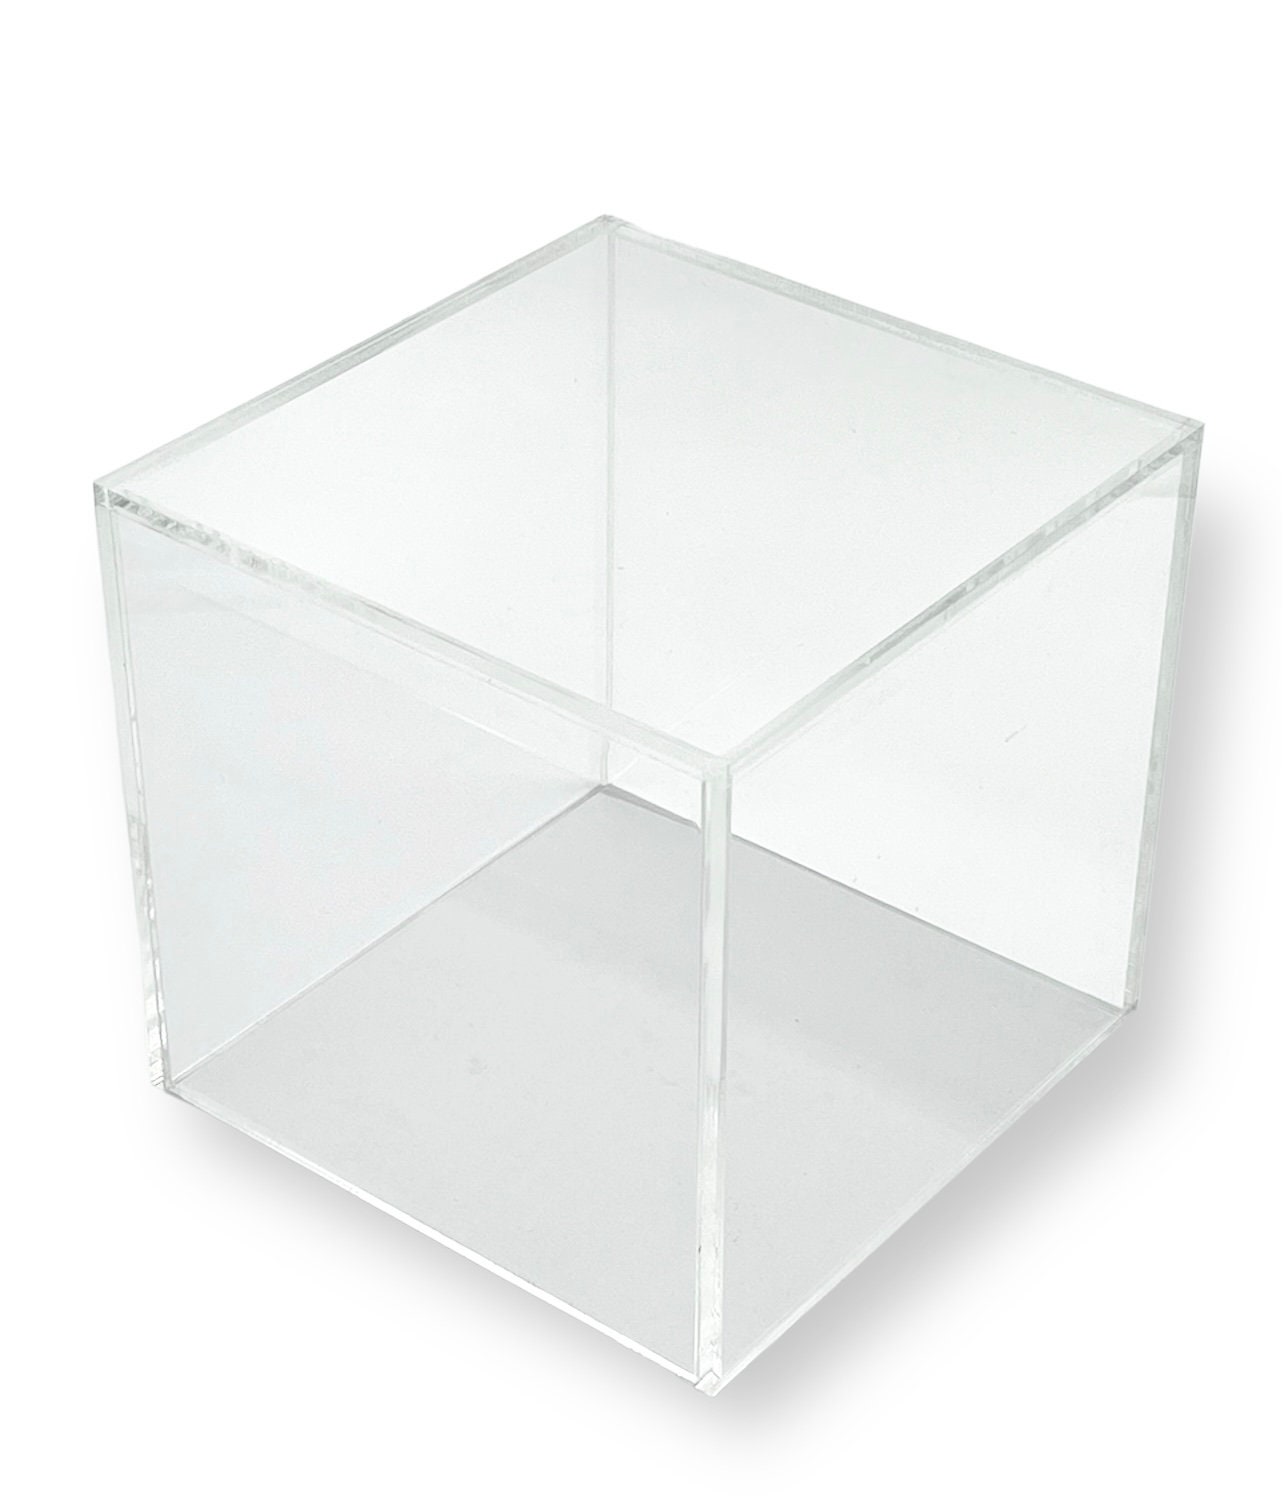 Dayaanee Round Acrylic Container with Lid Clear Round Acrylic Box